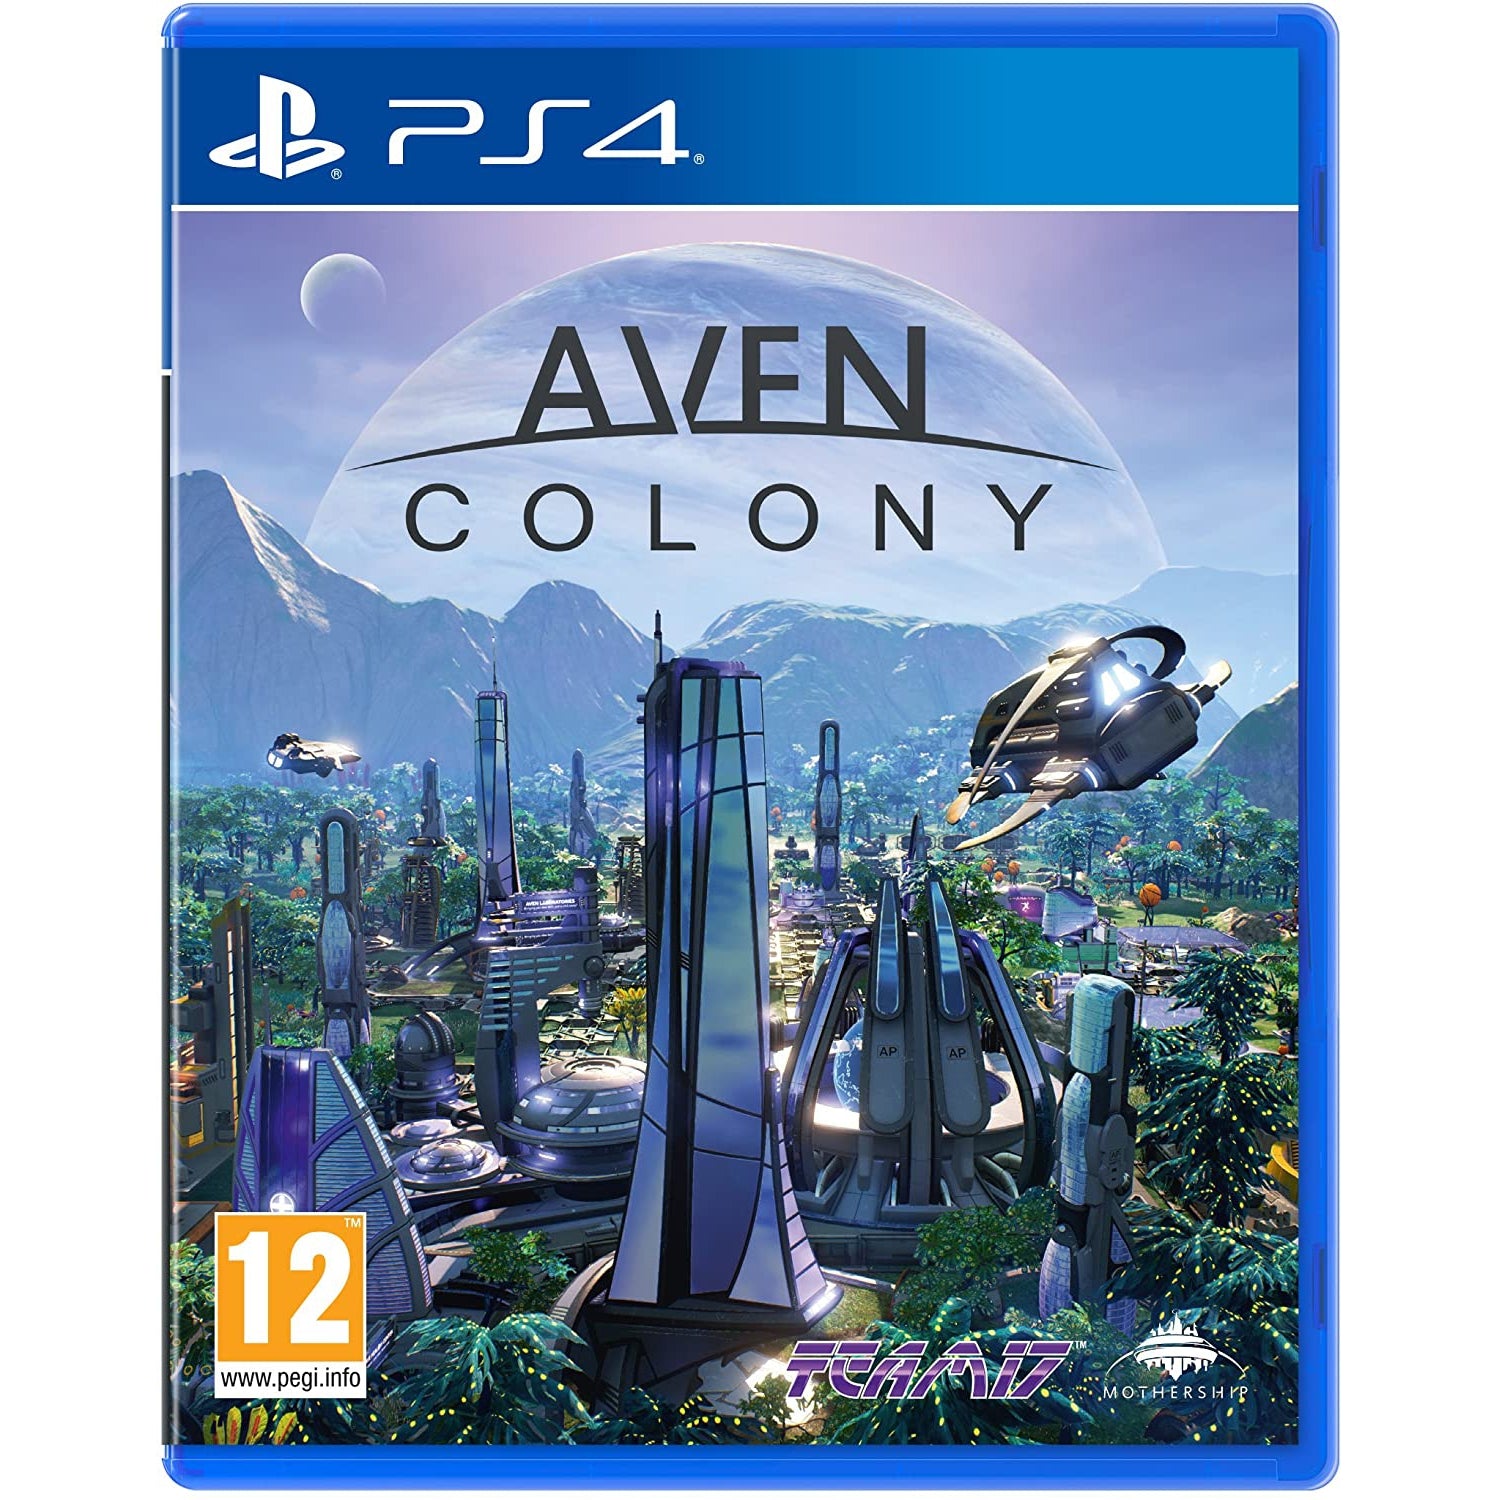 Aven Colony (PS4)